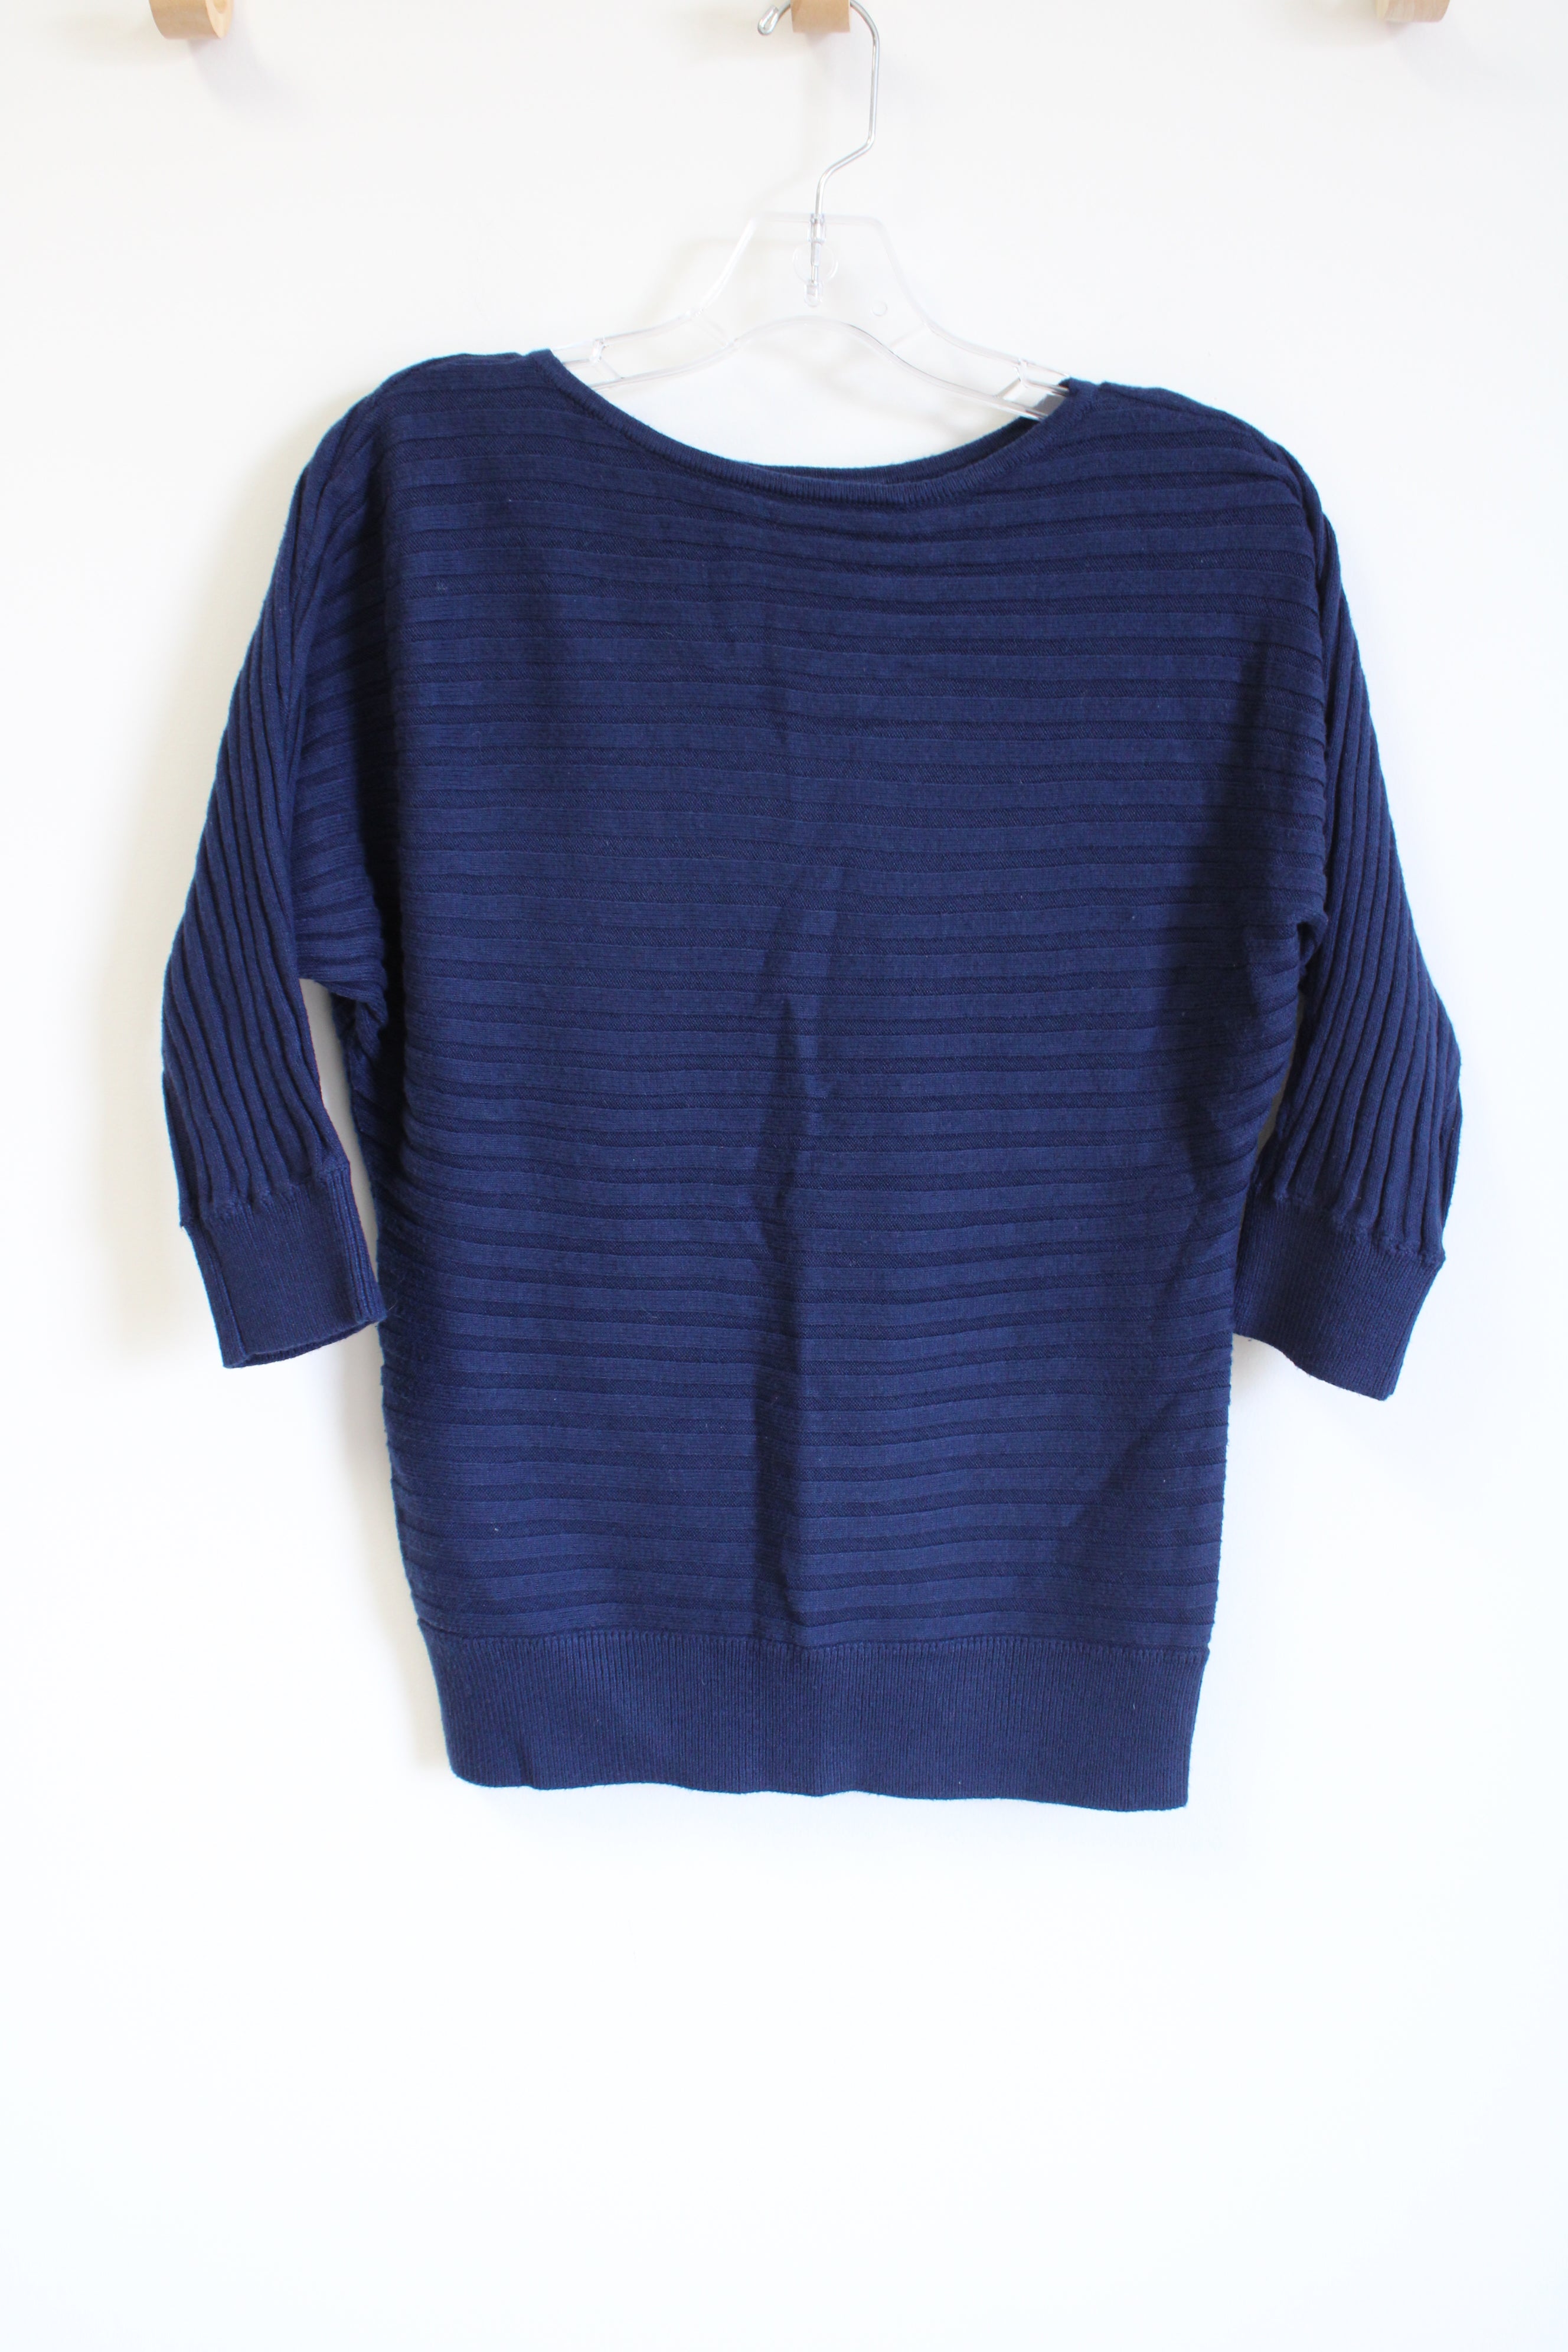 Ann Taylor Navy Blue Ribbed Sweater | XS